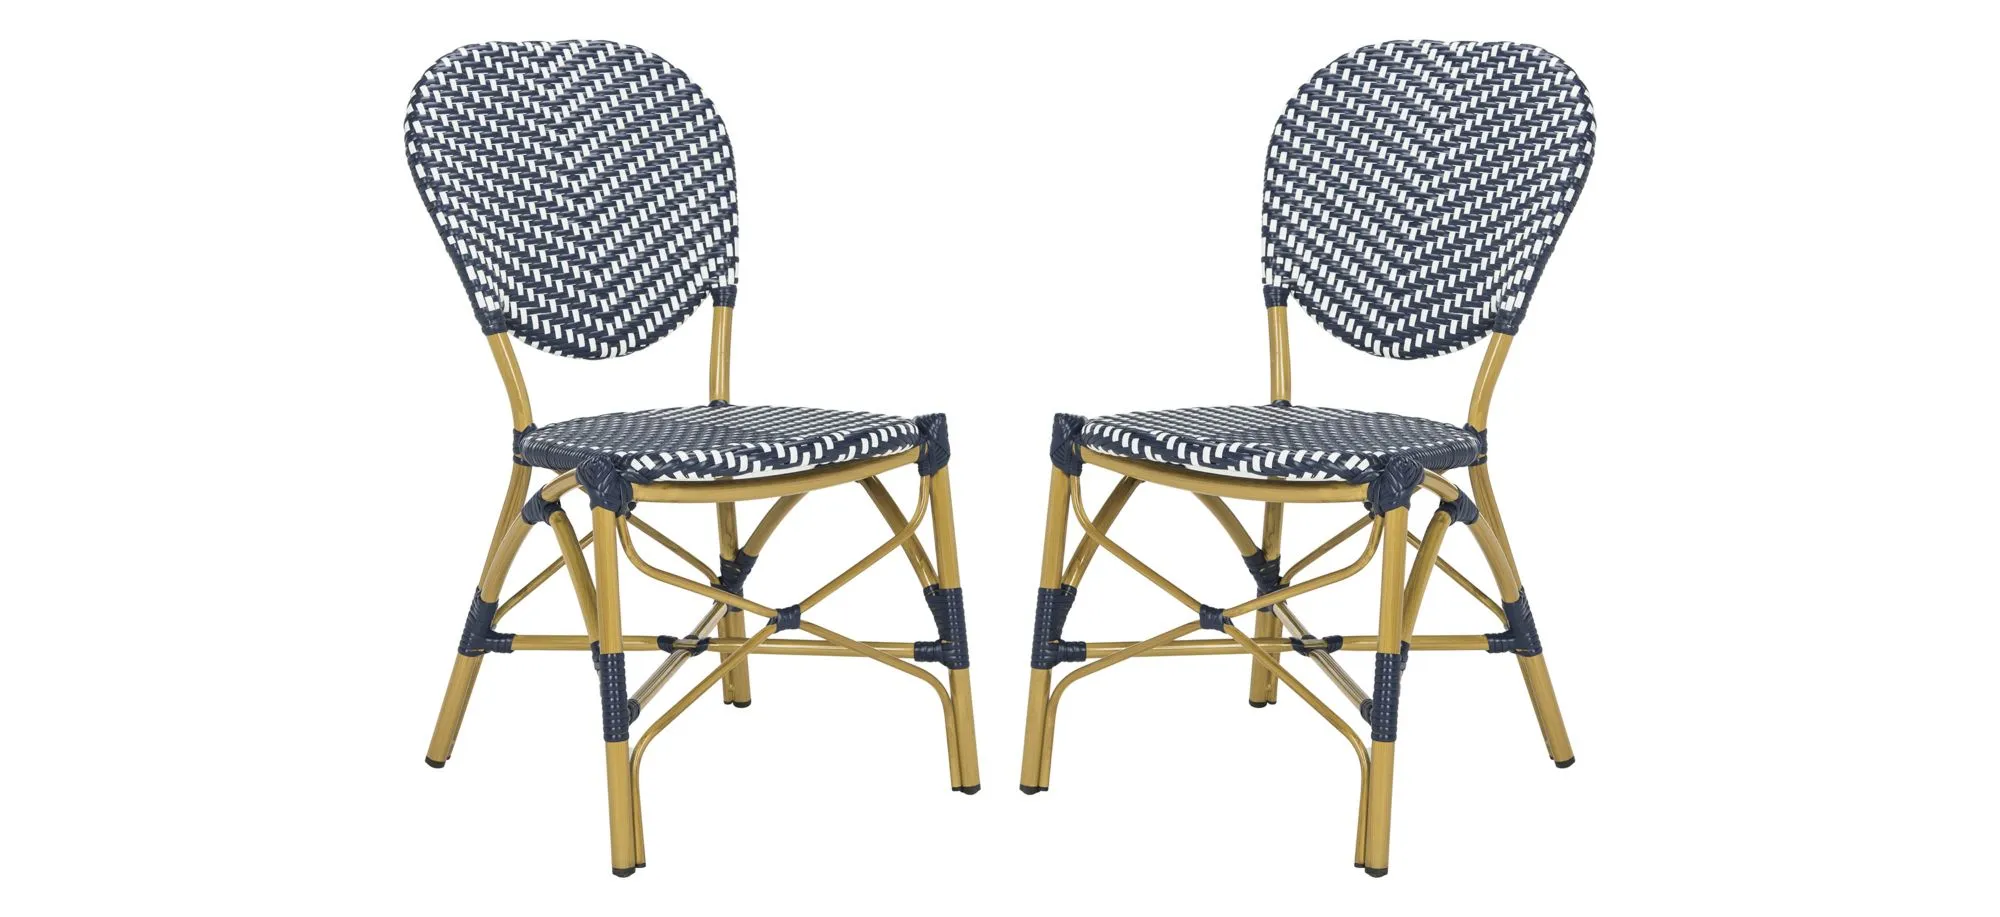 Europa Outdoor French Bistro Side Chair - Set of 2 in Petal by Safavieh